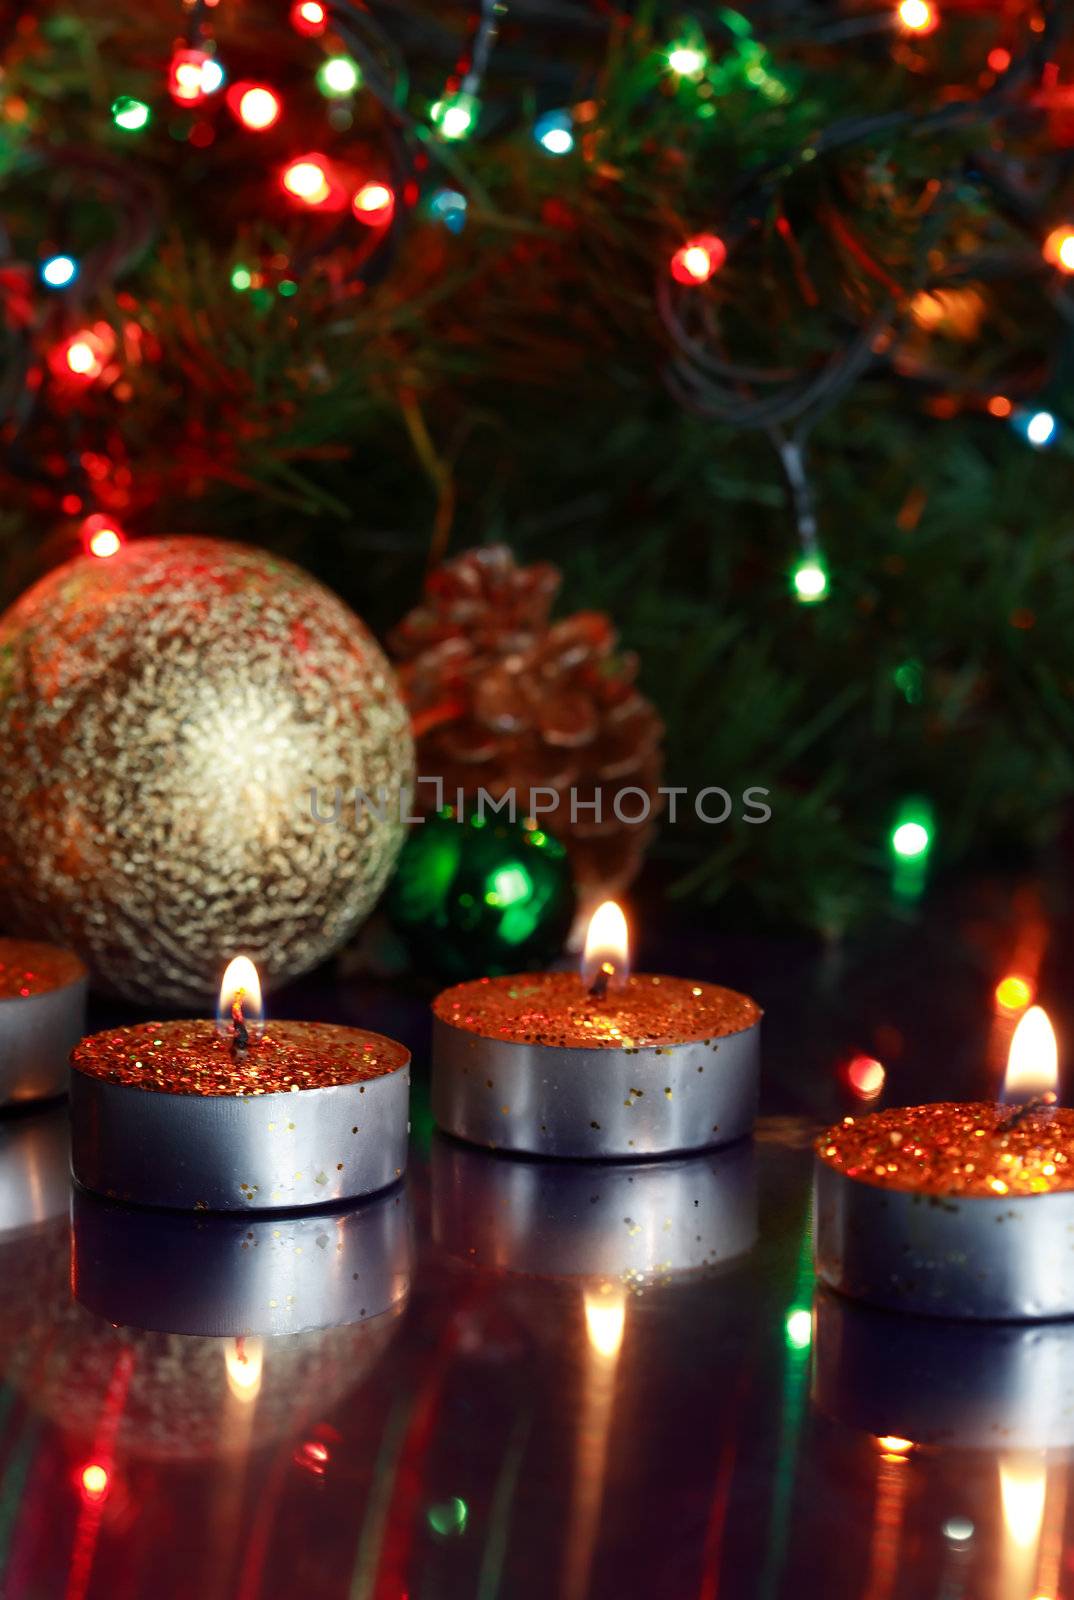 Few lighting candles on glass surfase with reflection on background with Christmas decorations